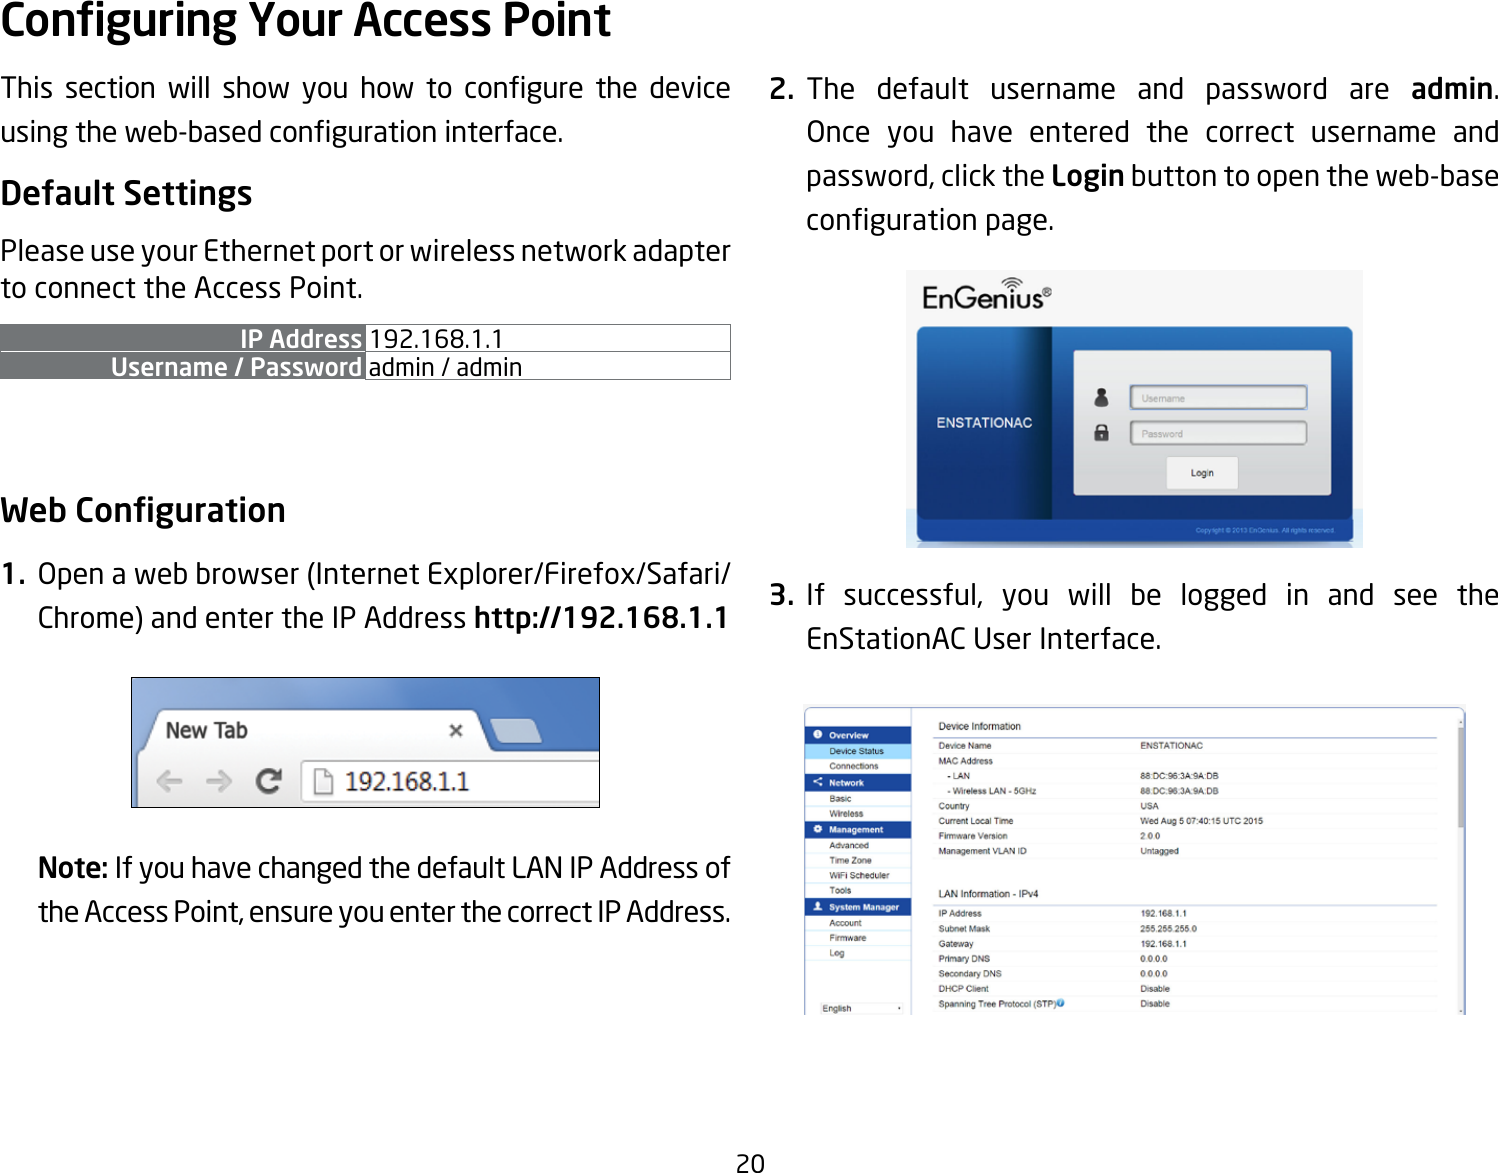 20This section will show you how to congure the deviceusingtheweb-basedcongurationinterface.Default SettingsPlease use your Ethernet port or wireless network adapter to connect the Access Point.IP Address 192.168.1.1Username / Password admin / admin Web Conguration1.  Openawebbrowser(InternetExplorer/Firefox/Safari/Chrome) and enter the IP Address http://192.168.1.1Note: If you have changed the default LAN IP Address of the Access Point, ensure you enter the correct IP Address.2. The default username and password are admin. Once you have entered the correct username andpassword, click the Login button to open the web-base congurationpage.3. If successful, you will be logged in and see the EnStationACUserInterface.Conguring Your Access Point